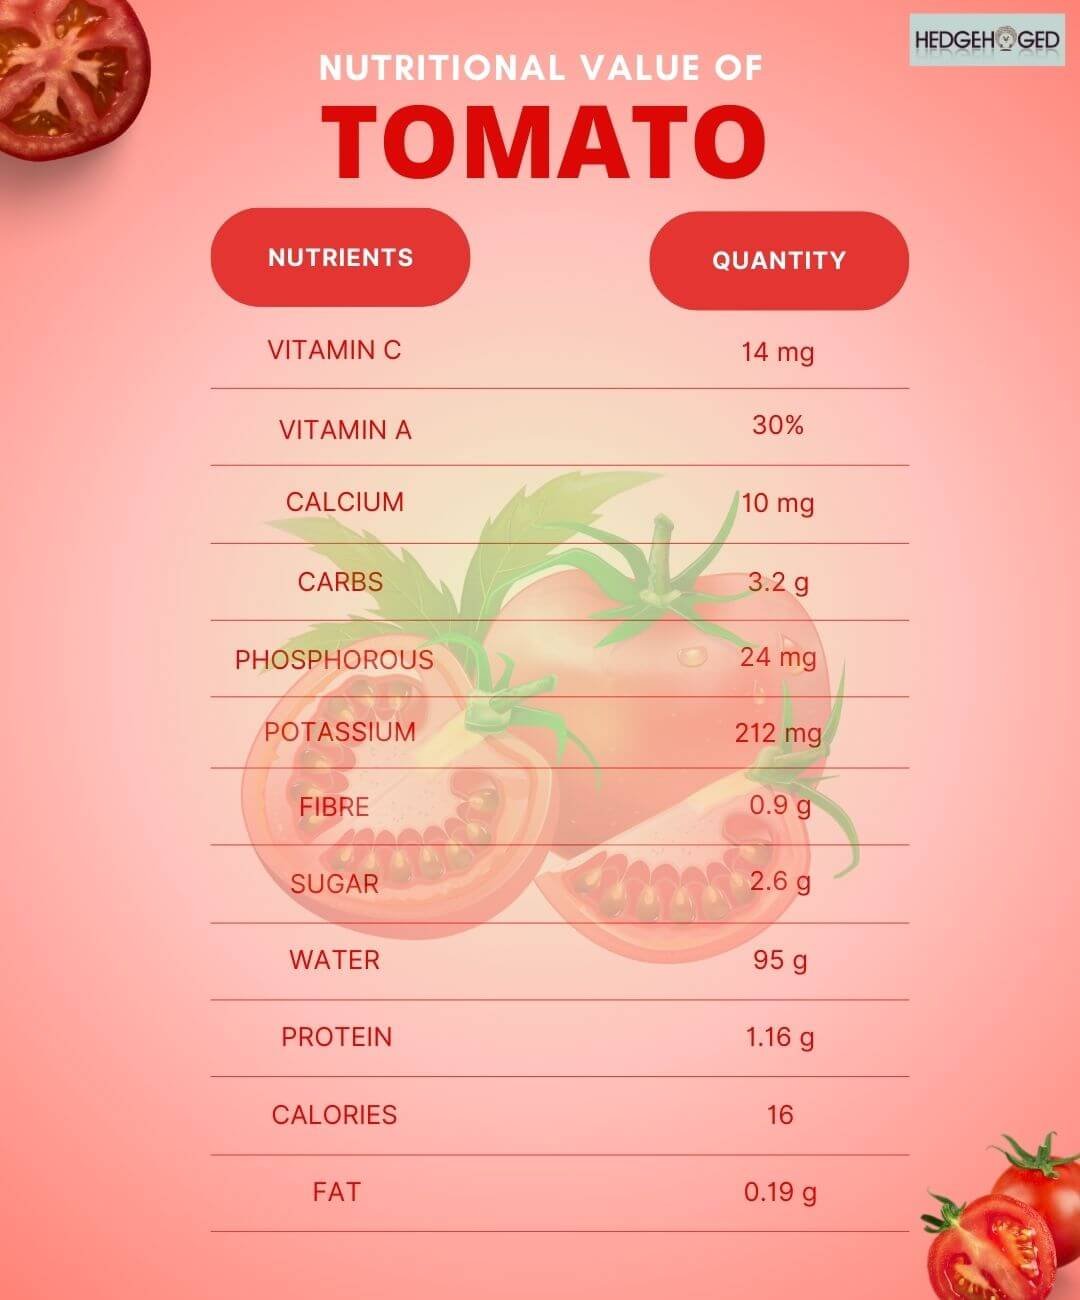 Nutritional Value Of Tomato